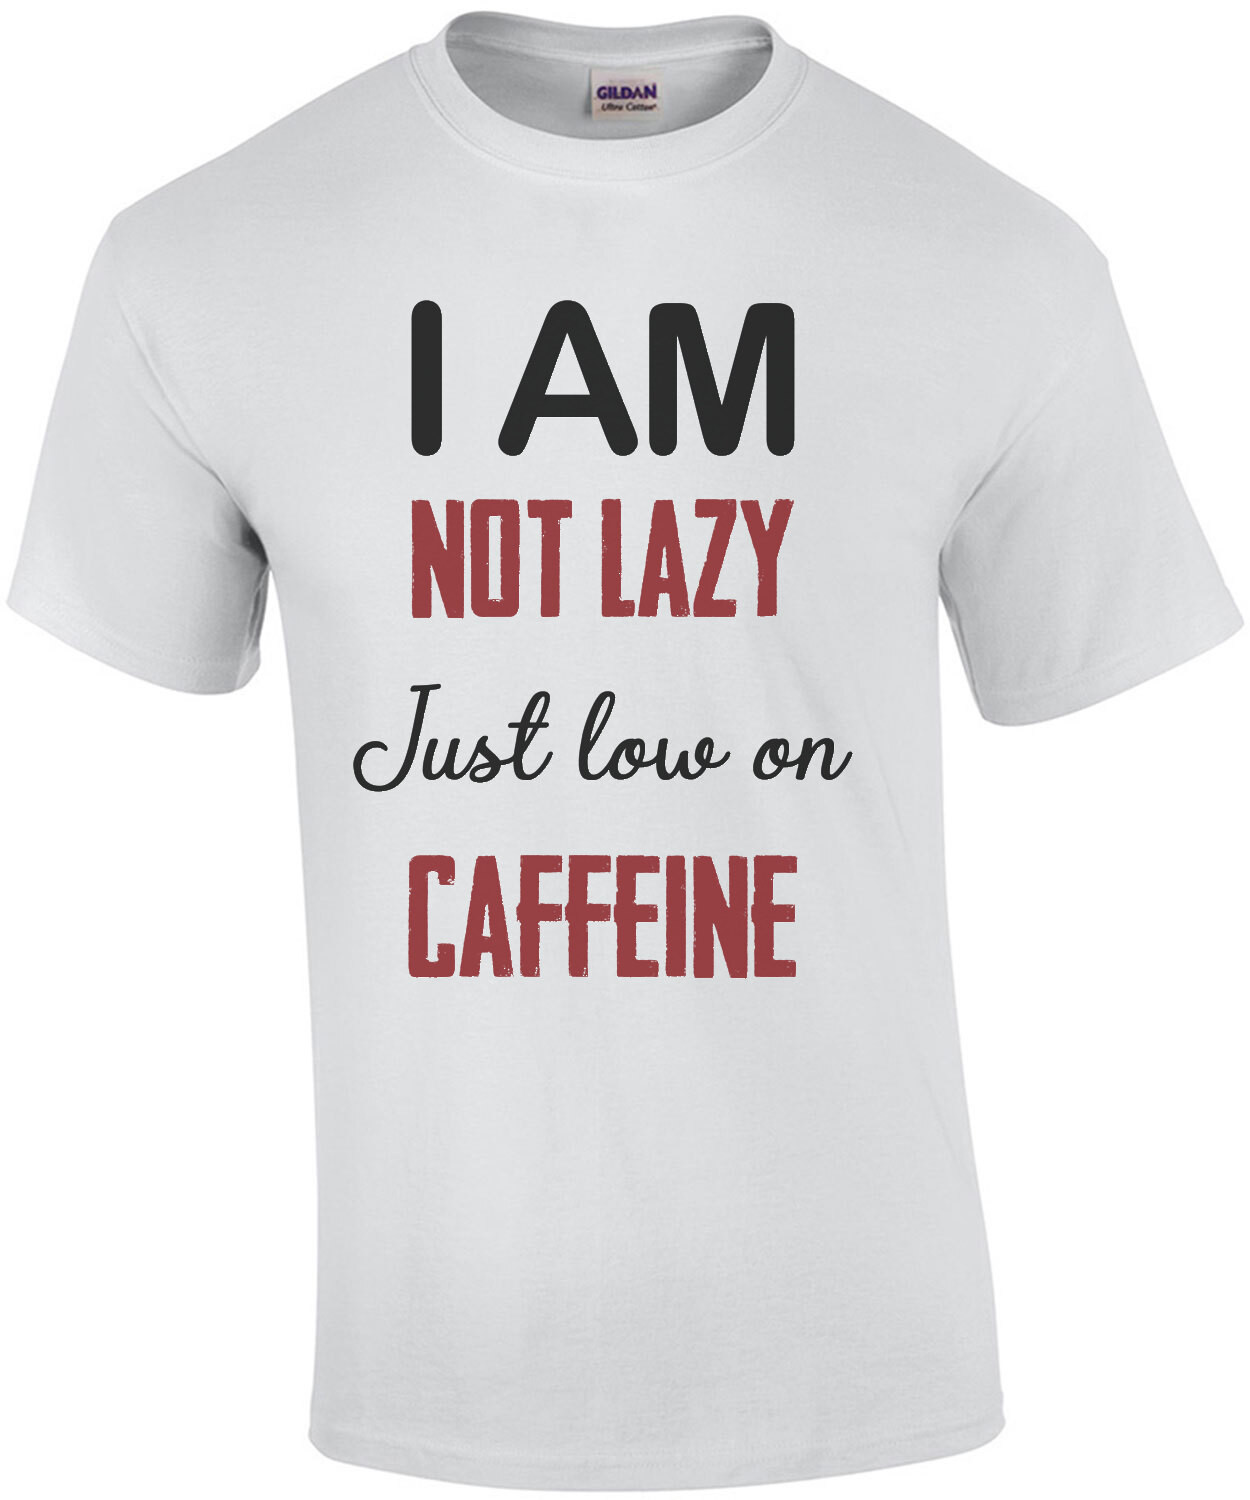 I am not lazy - Just low on Caffeine - funny coffee t-shirt